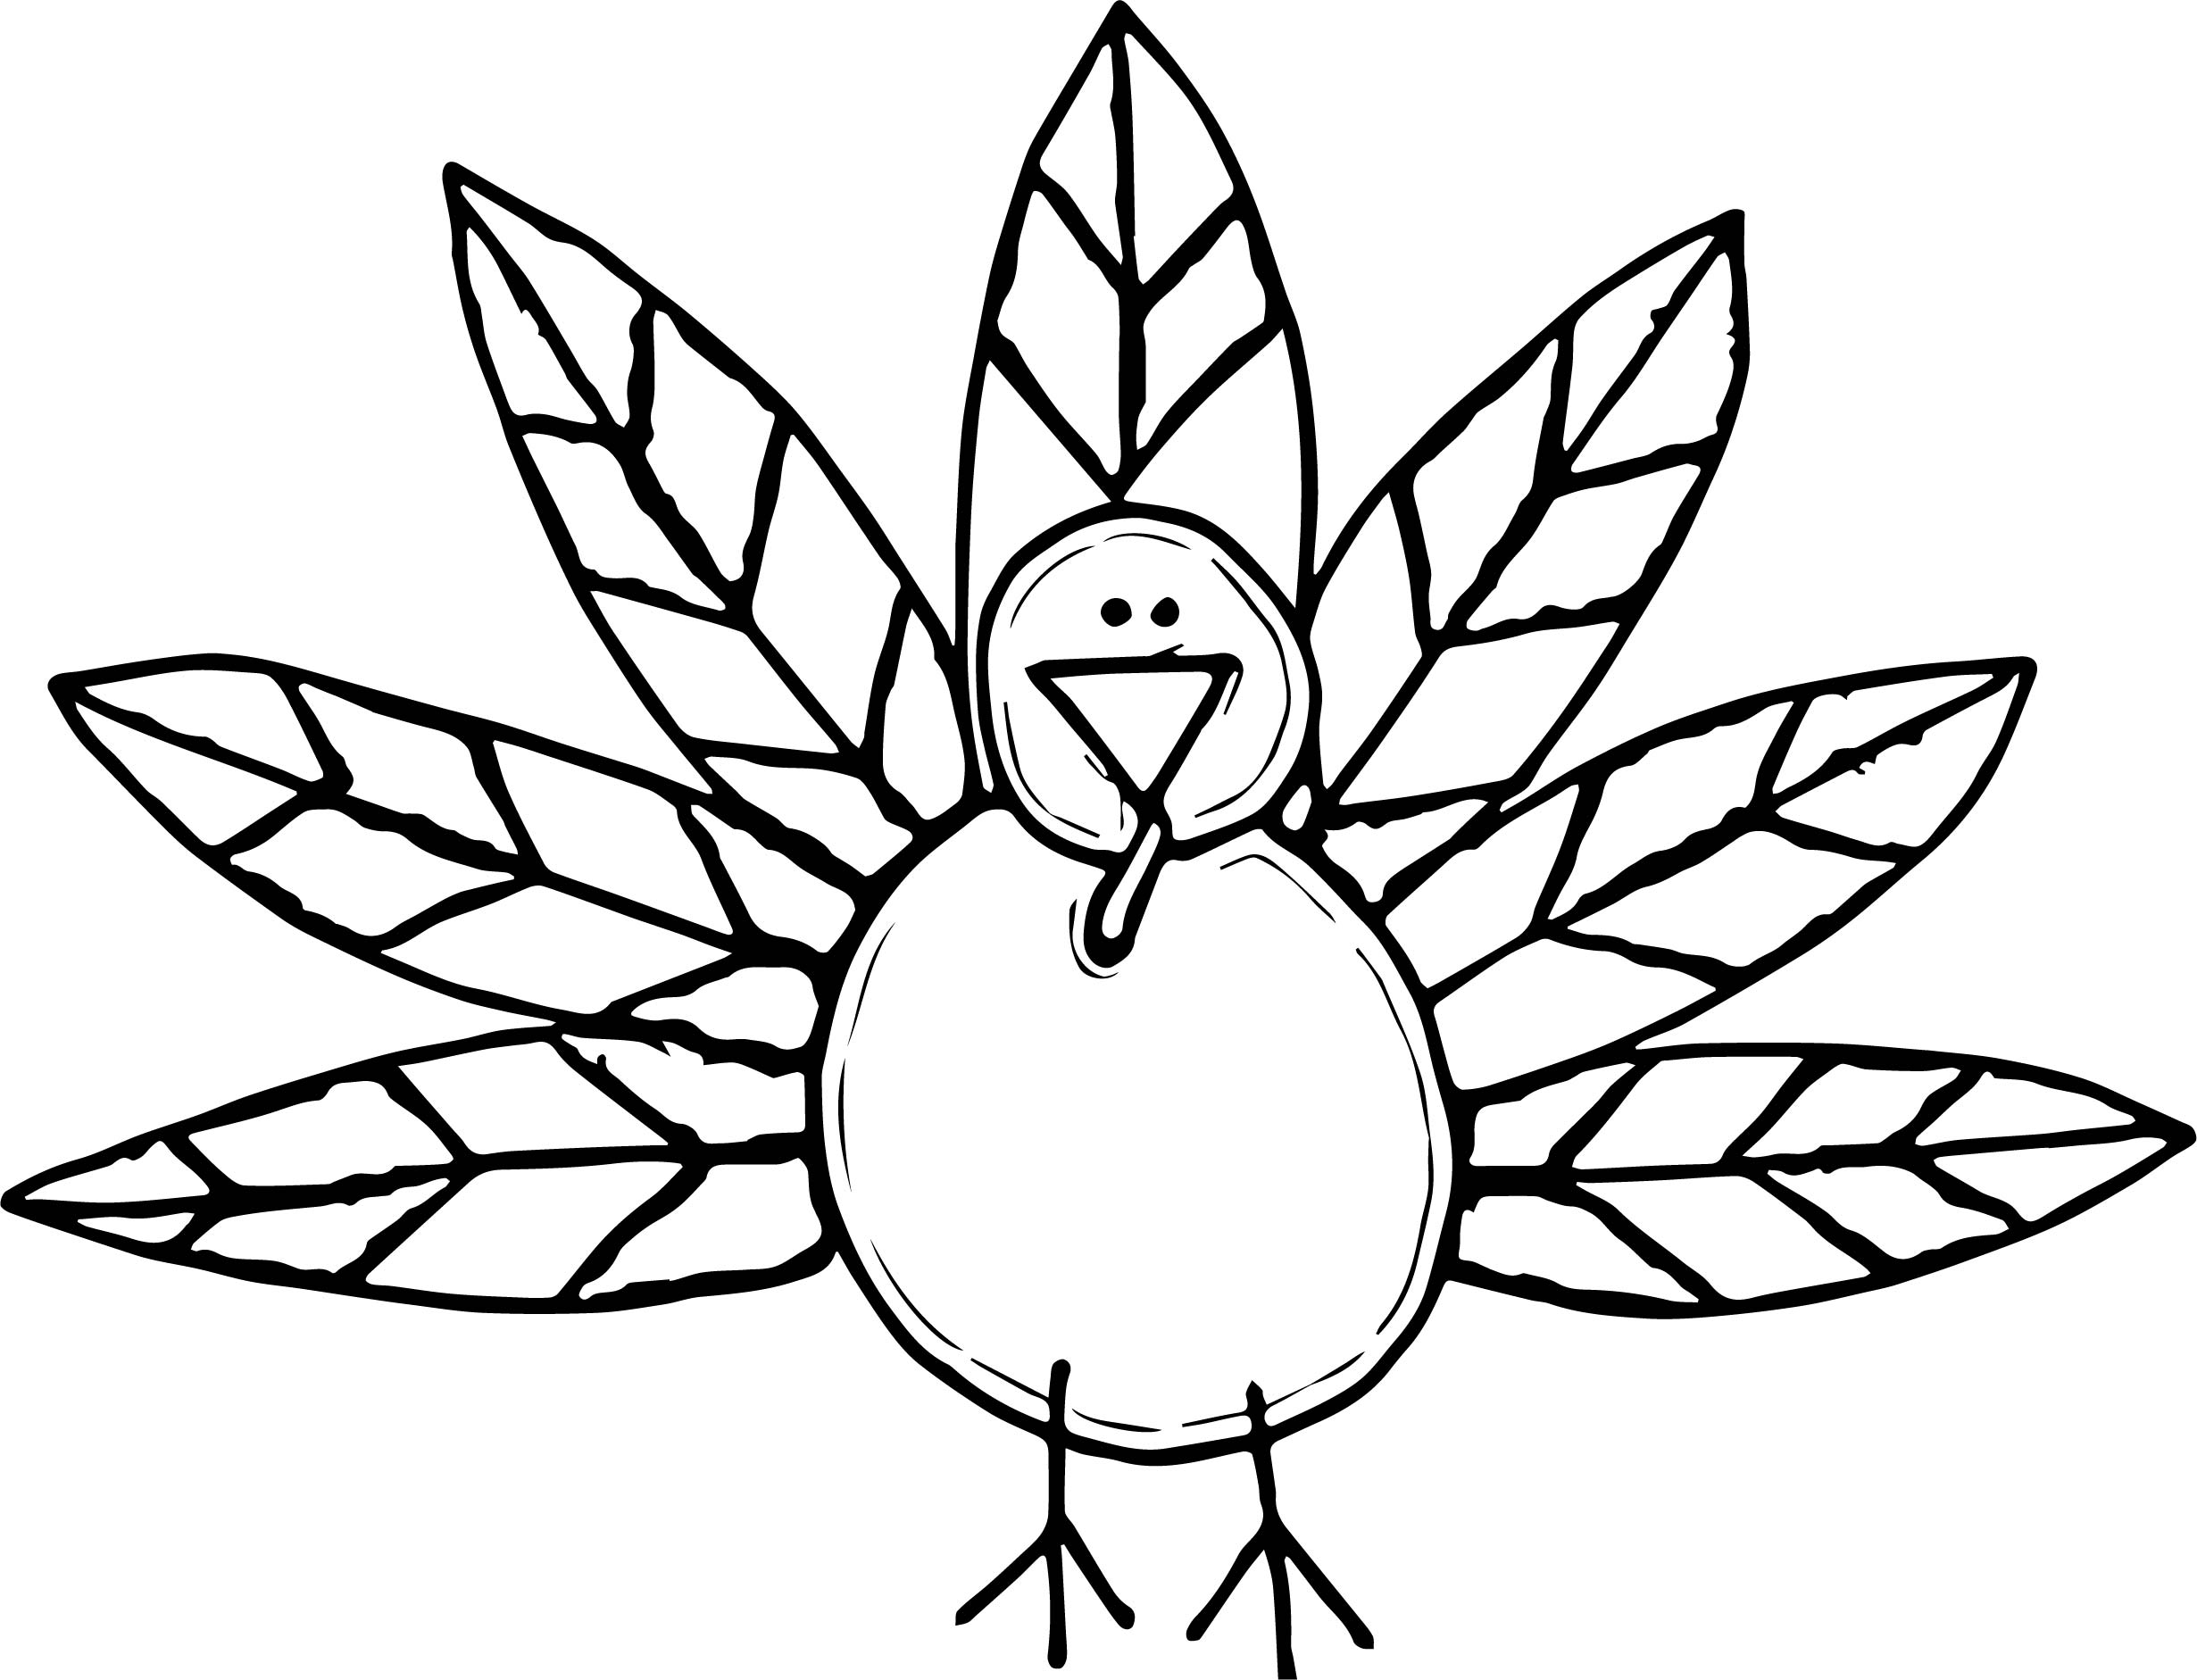 Any Thanksgiving Turkey Free Coloring Page ...